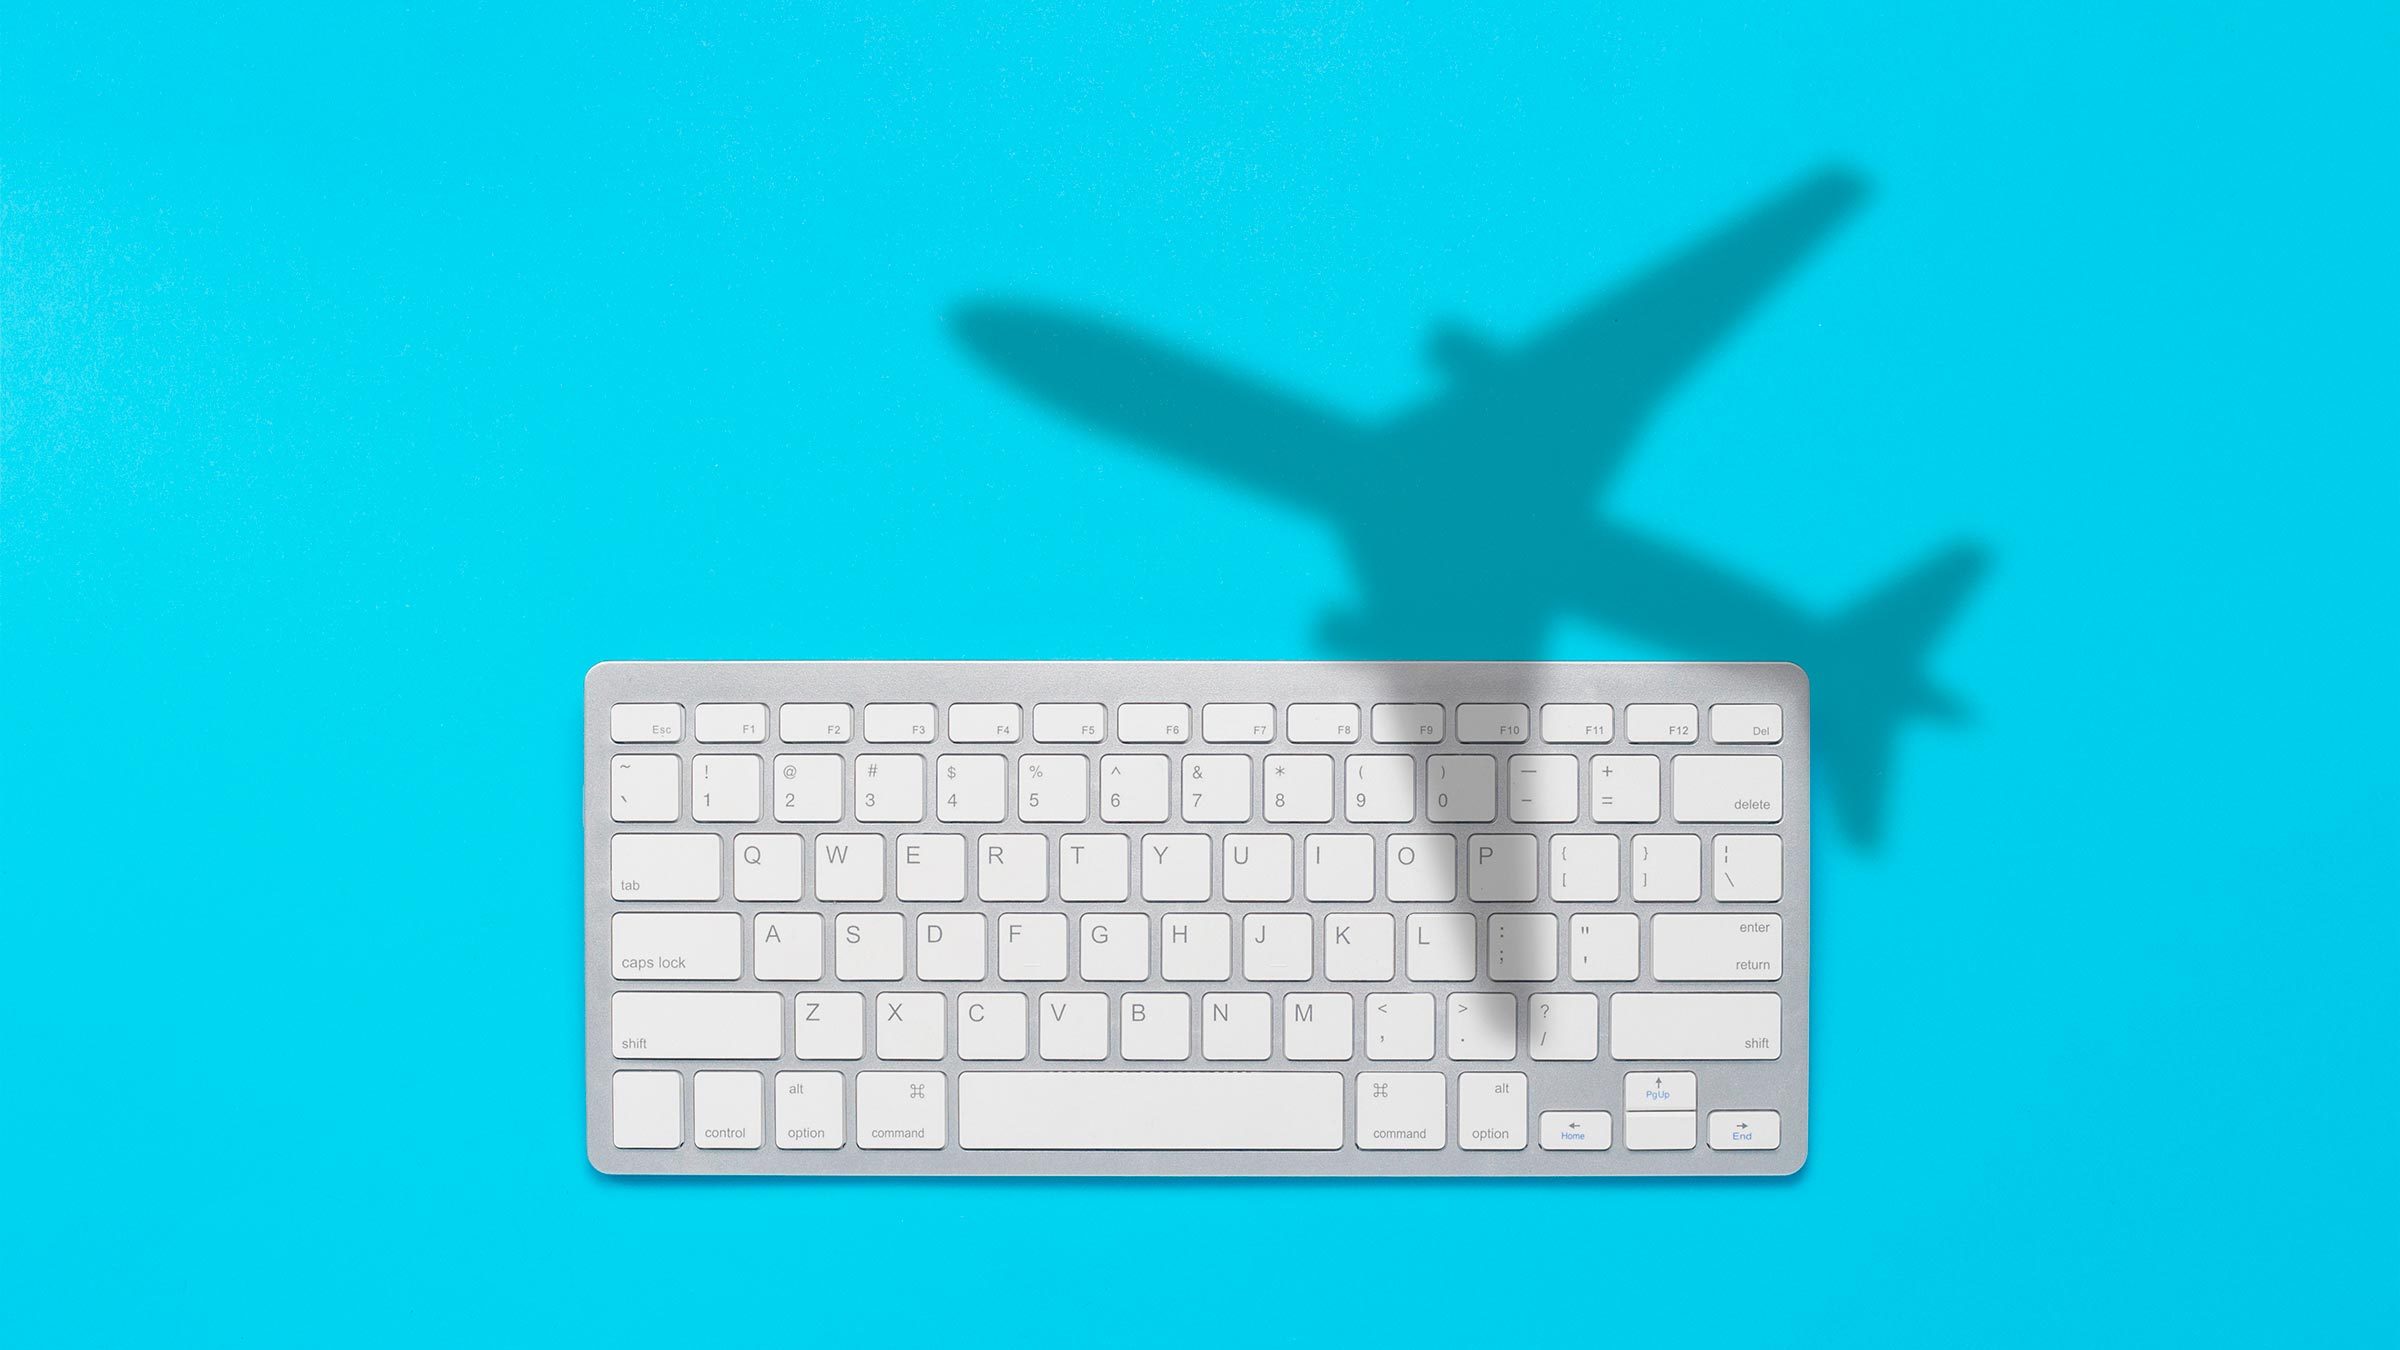 Keyboard and shadow of a flying plane on a blue background. The concept of buying tickets on the Internet online, booking tickets. Flat lay, top view.